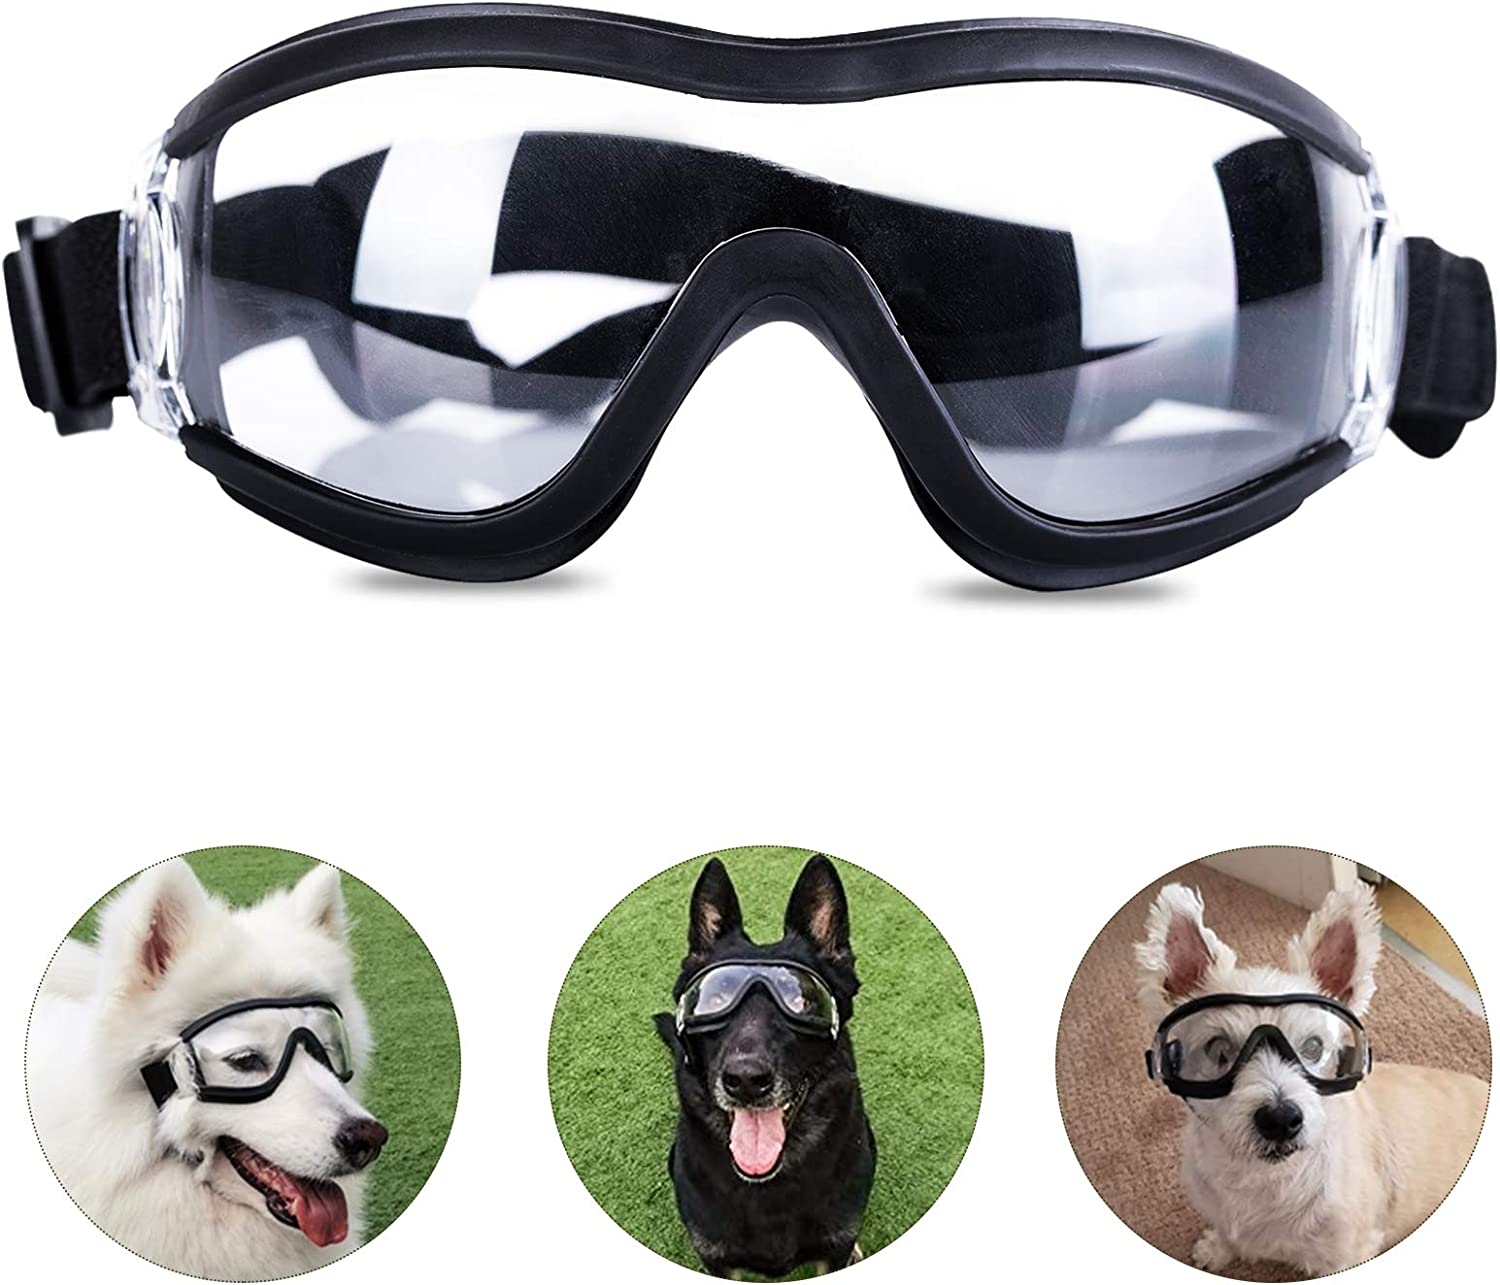 Dog Goggles White Eye Wear Protection Waterproof Pet Sunglasses for UV Protection Sunglasses Windproof for Medium/Large Dogs 